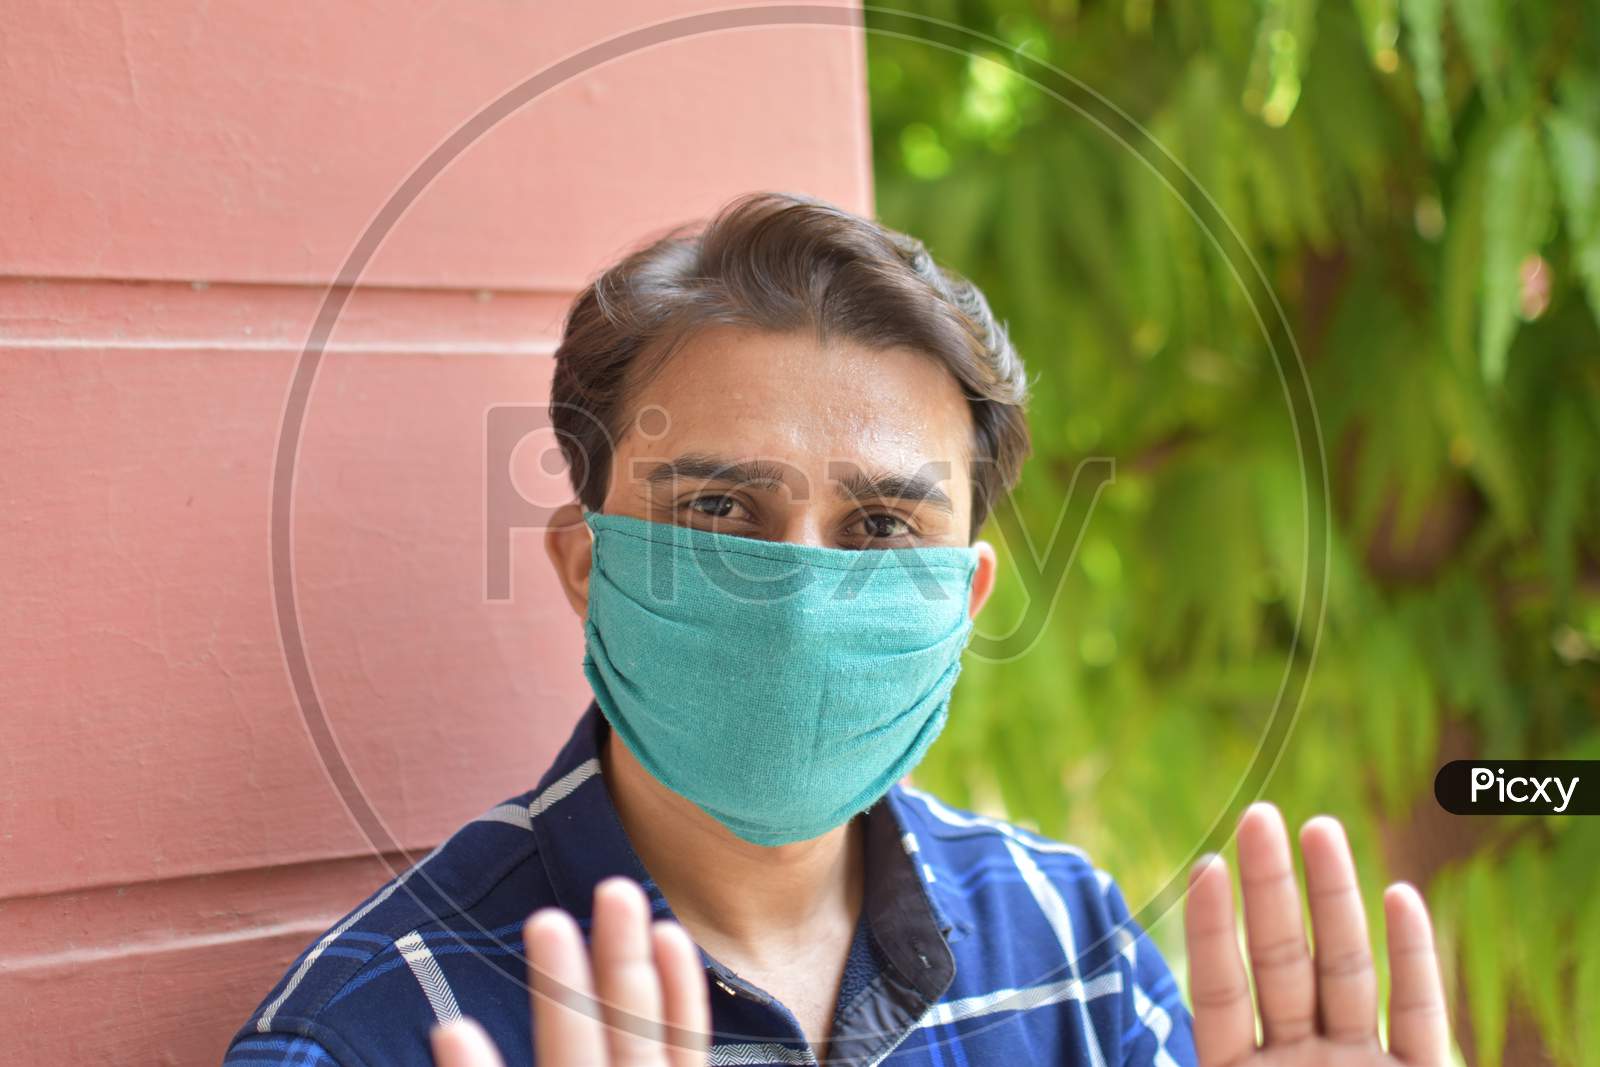 indian student with green mask on face